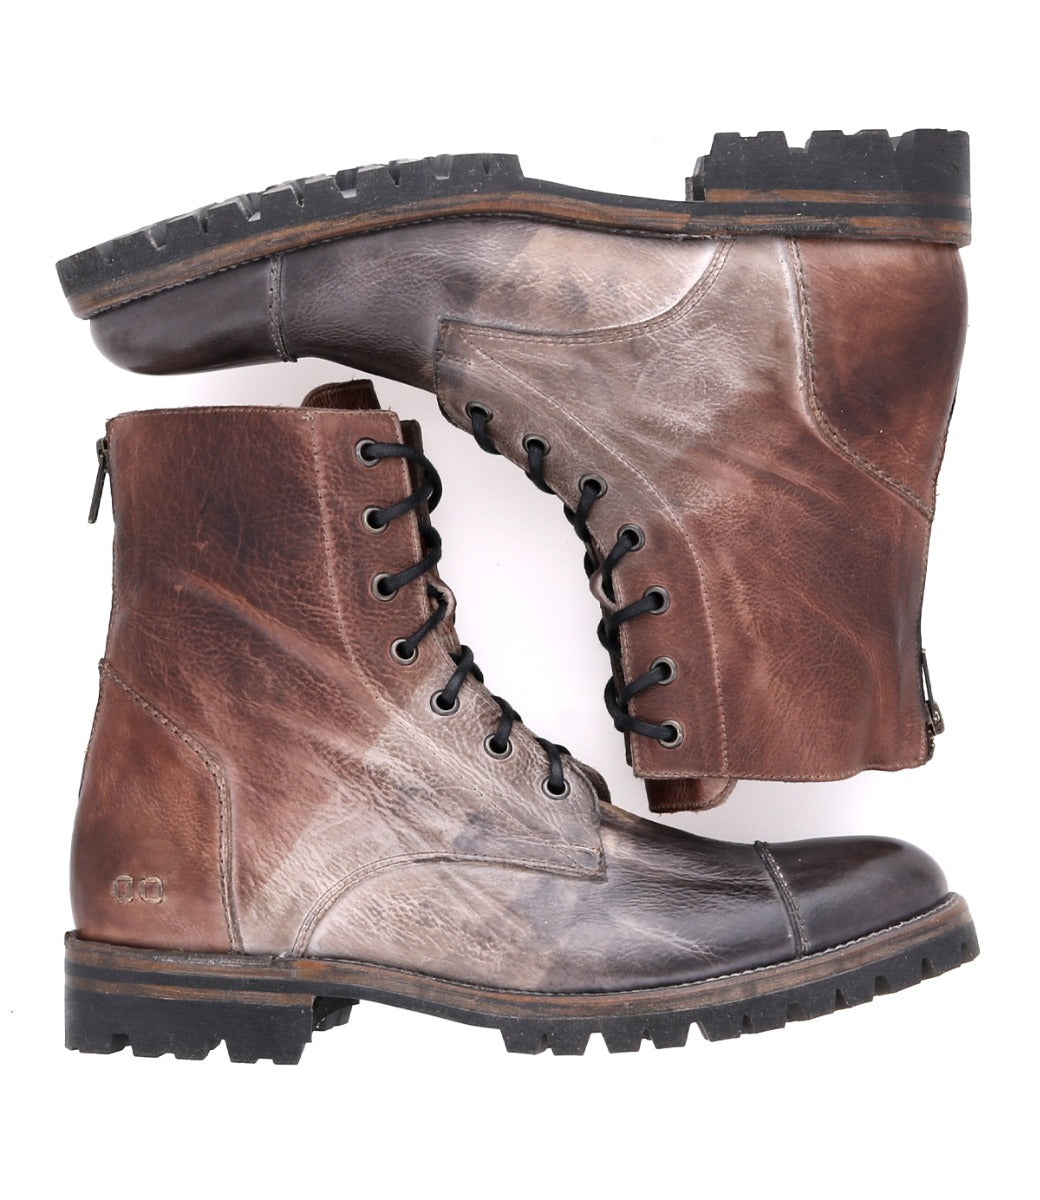 A pair of Bed Stu Protege Trek brown leather lace-up boots with a Vibram outsole, displayed against a white background.